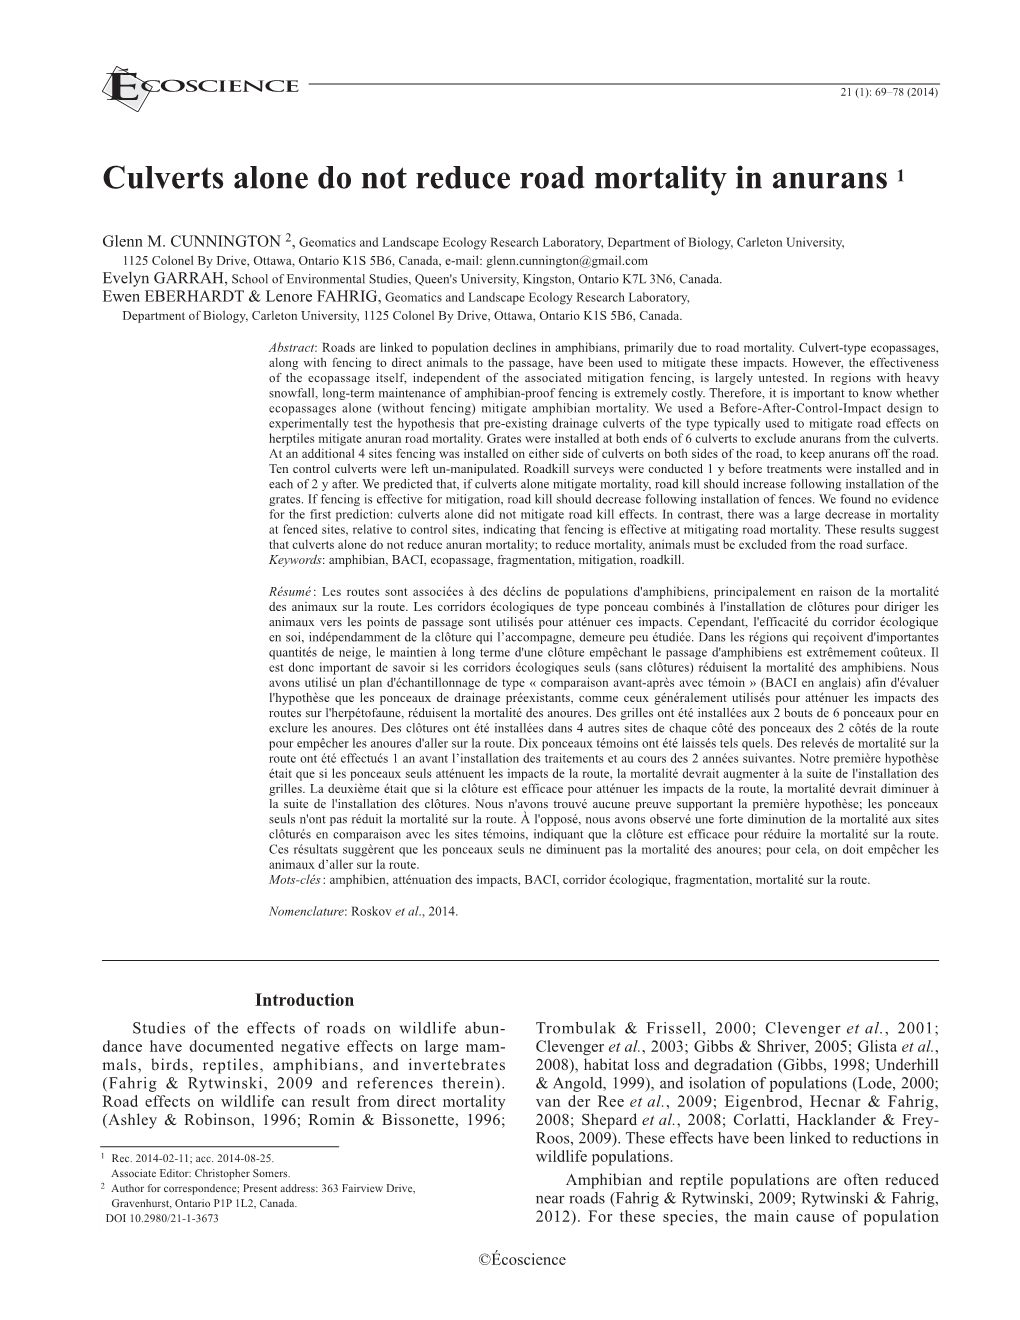 Culverts Alone Do Not Reduce Road Mortality in Anurans 1